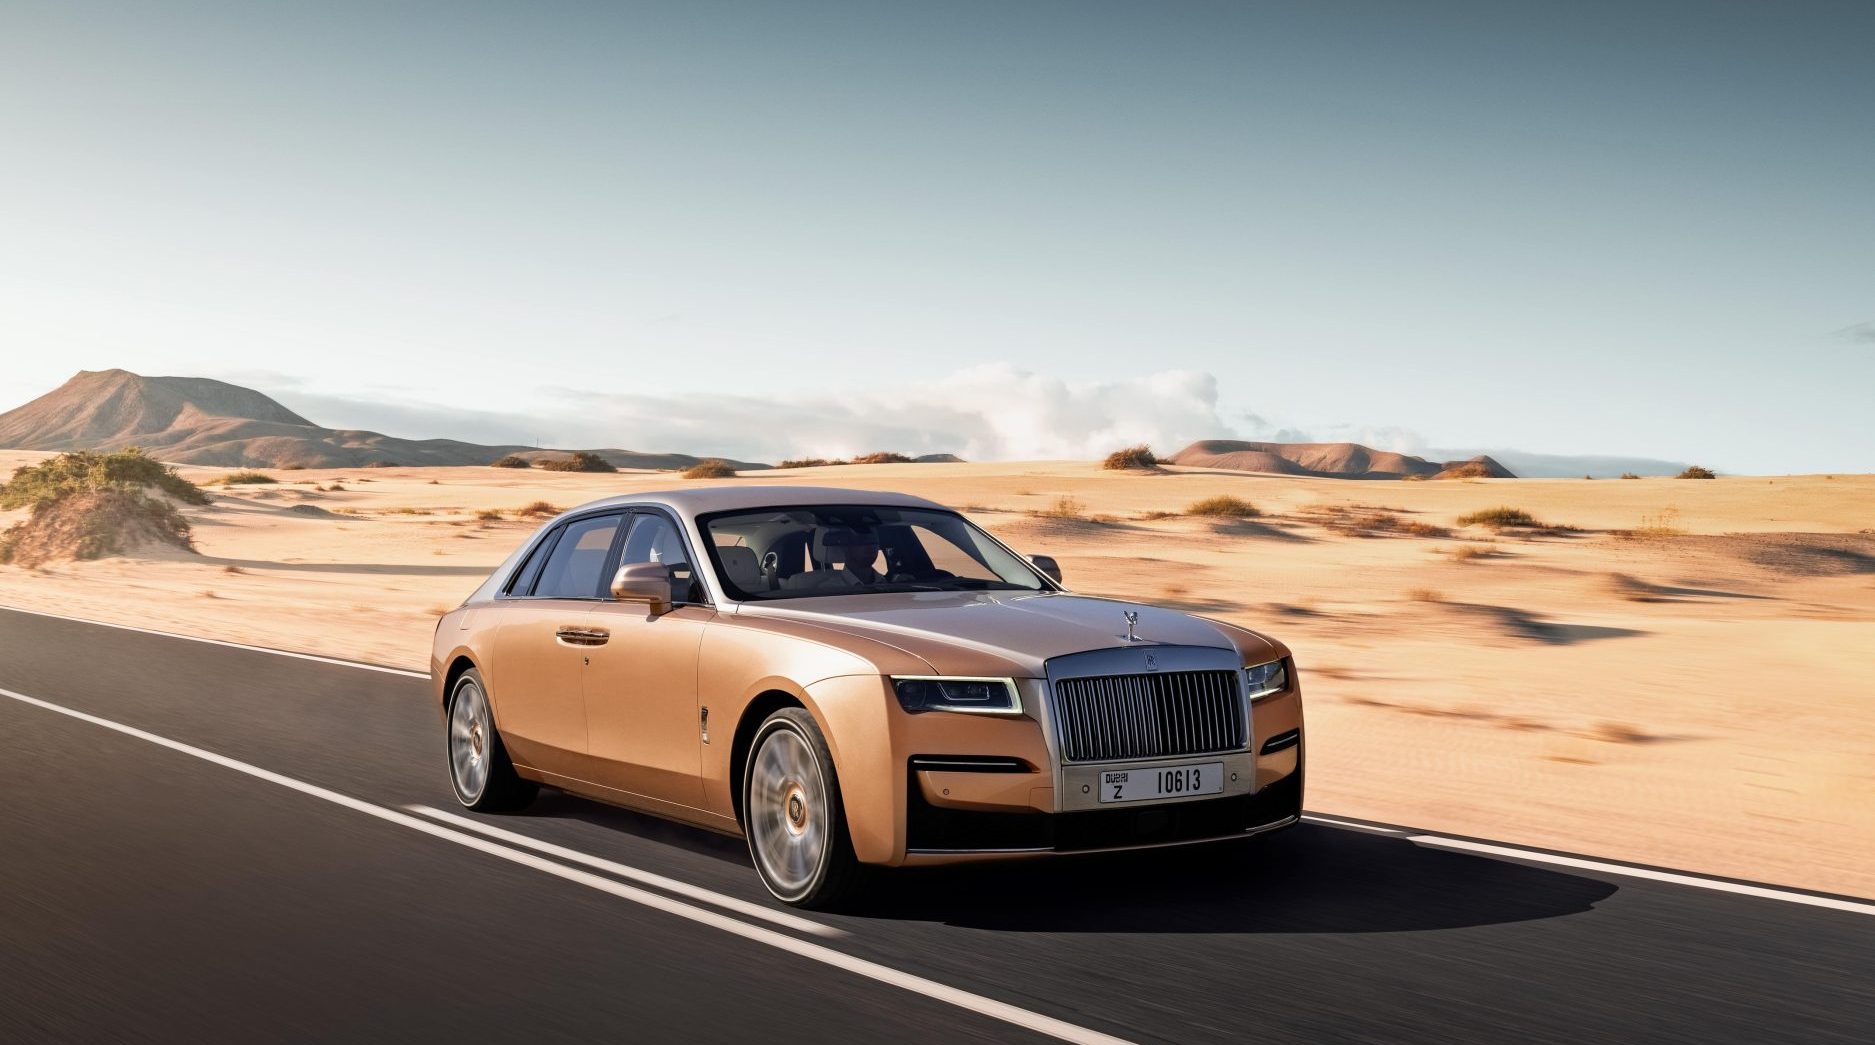 Rolls-Royce Ghost extended: A work of art from the Rolls-Royce Private Office Dubai